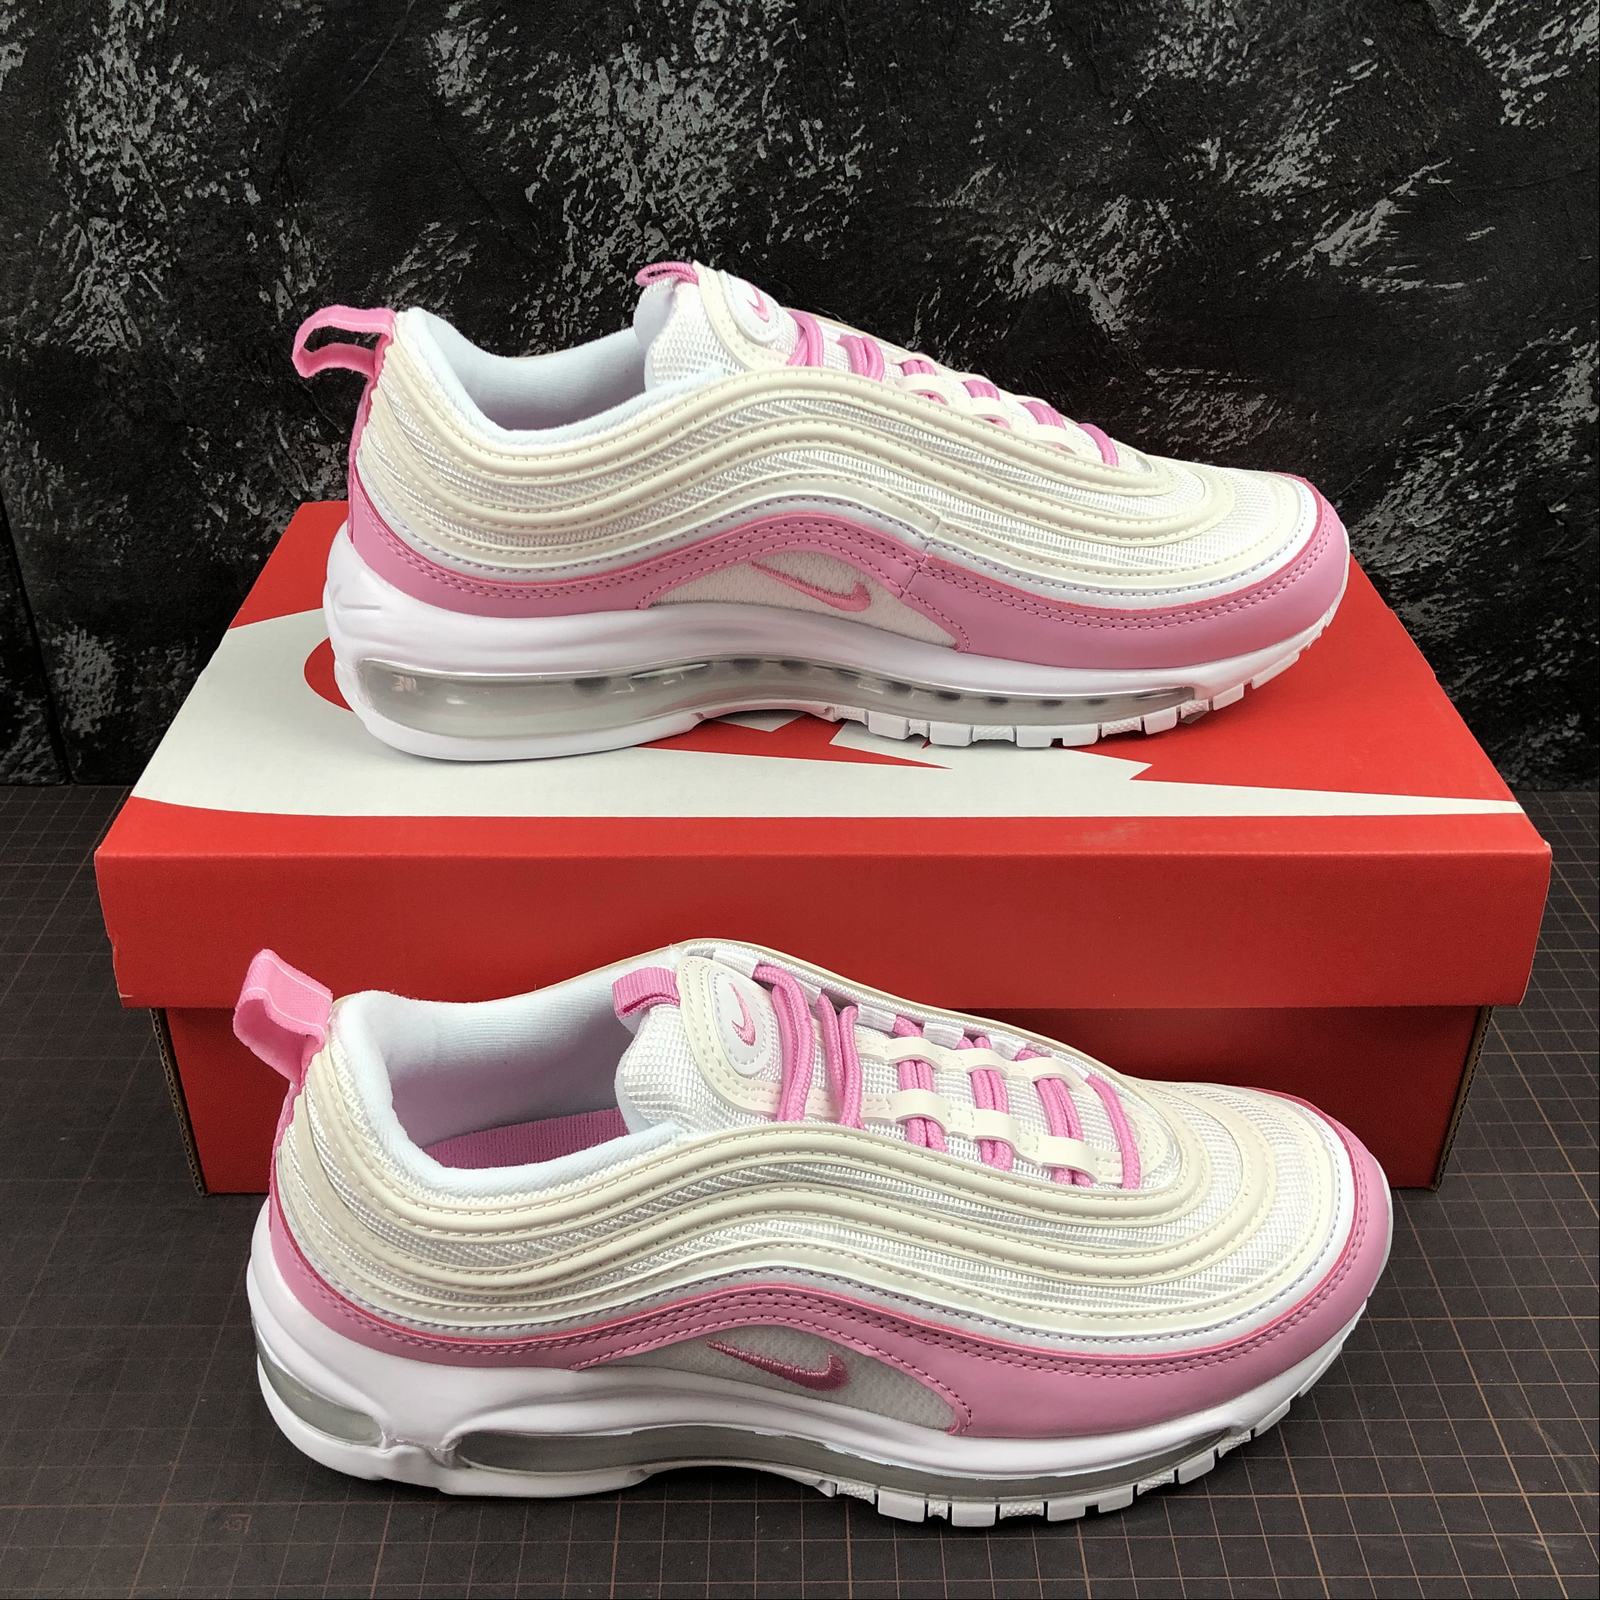 Nike Air Max 97 GS White/Psychic Pink 